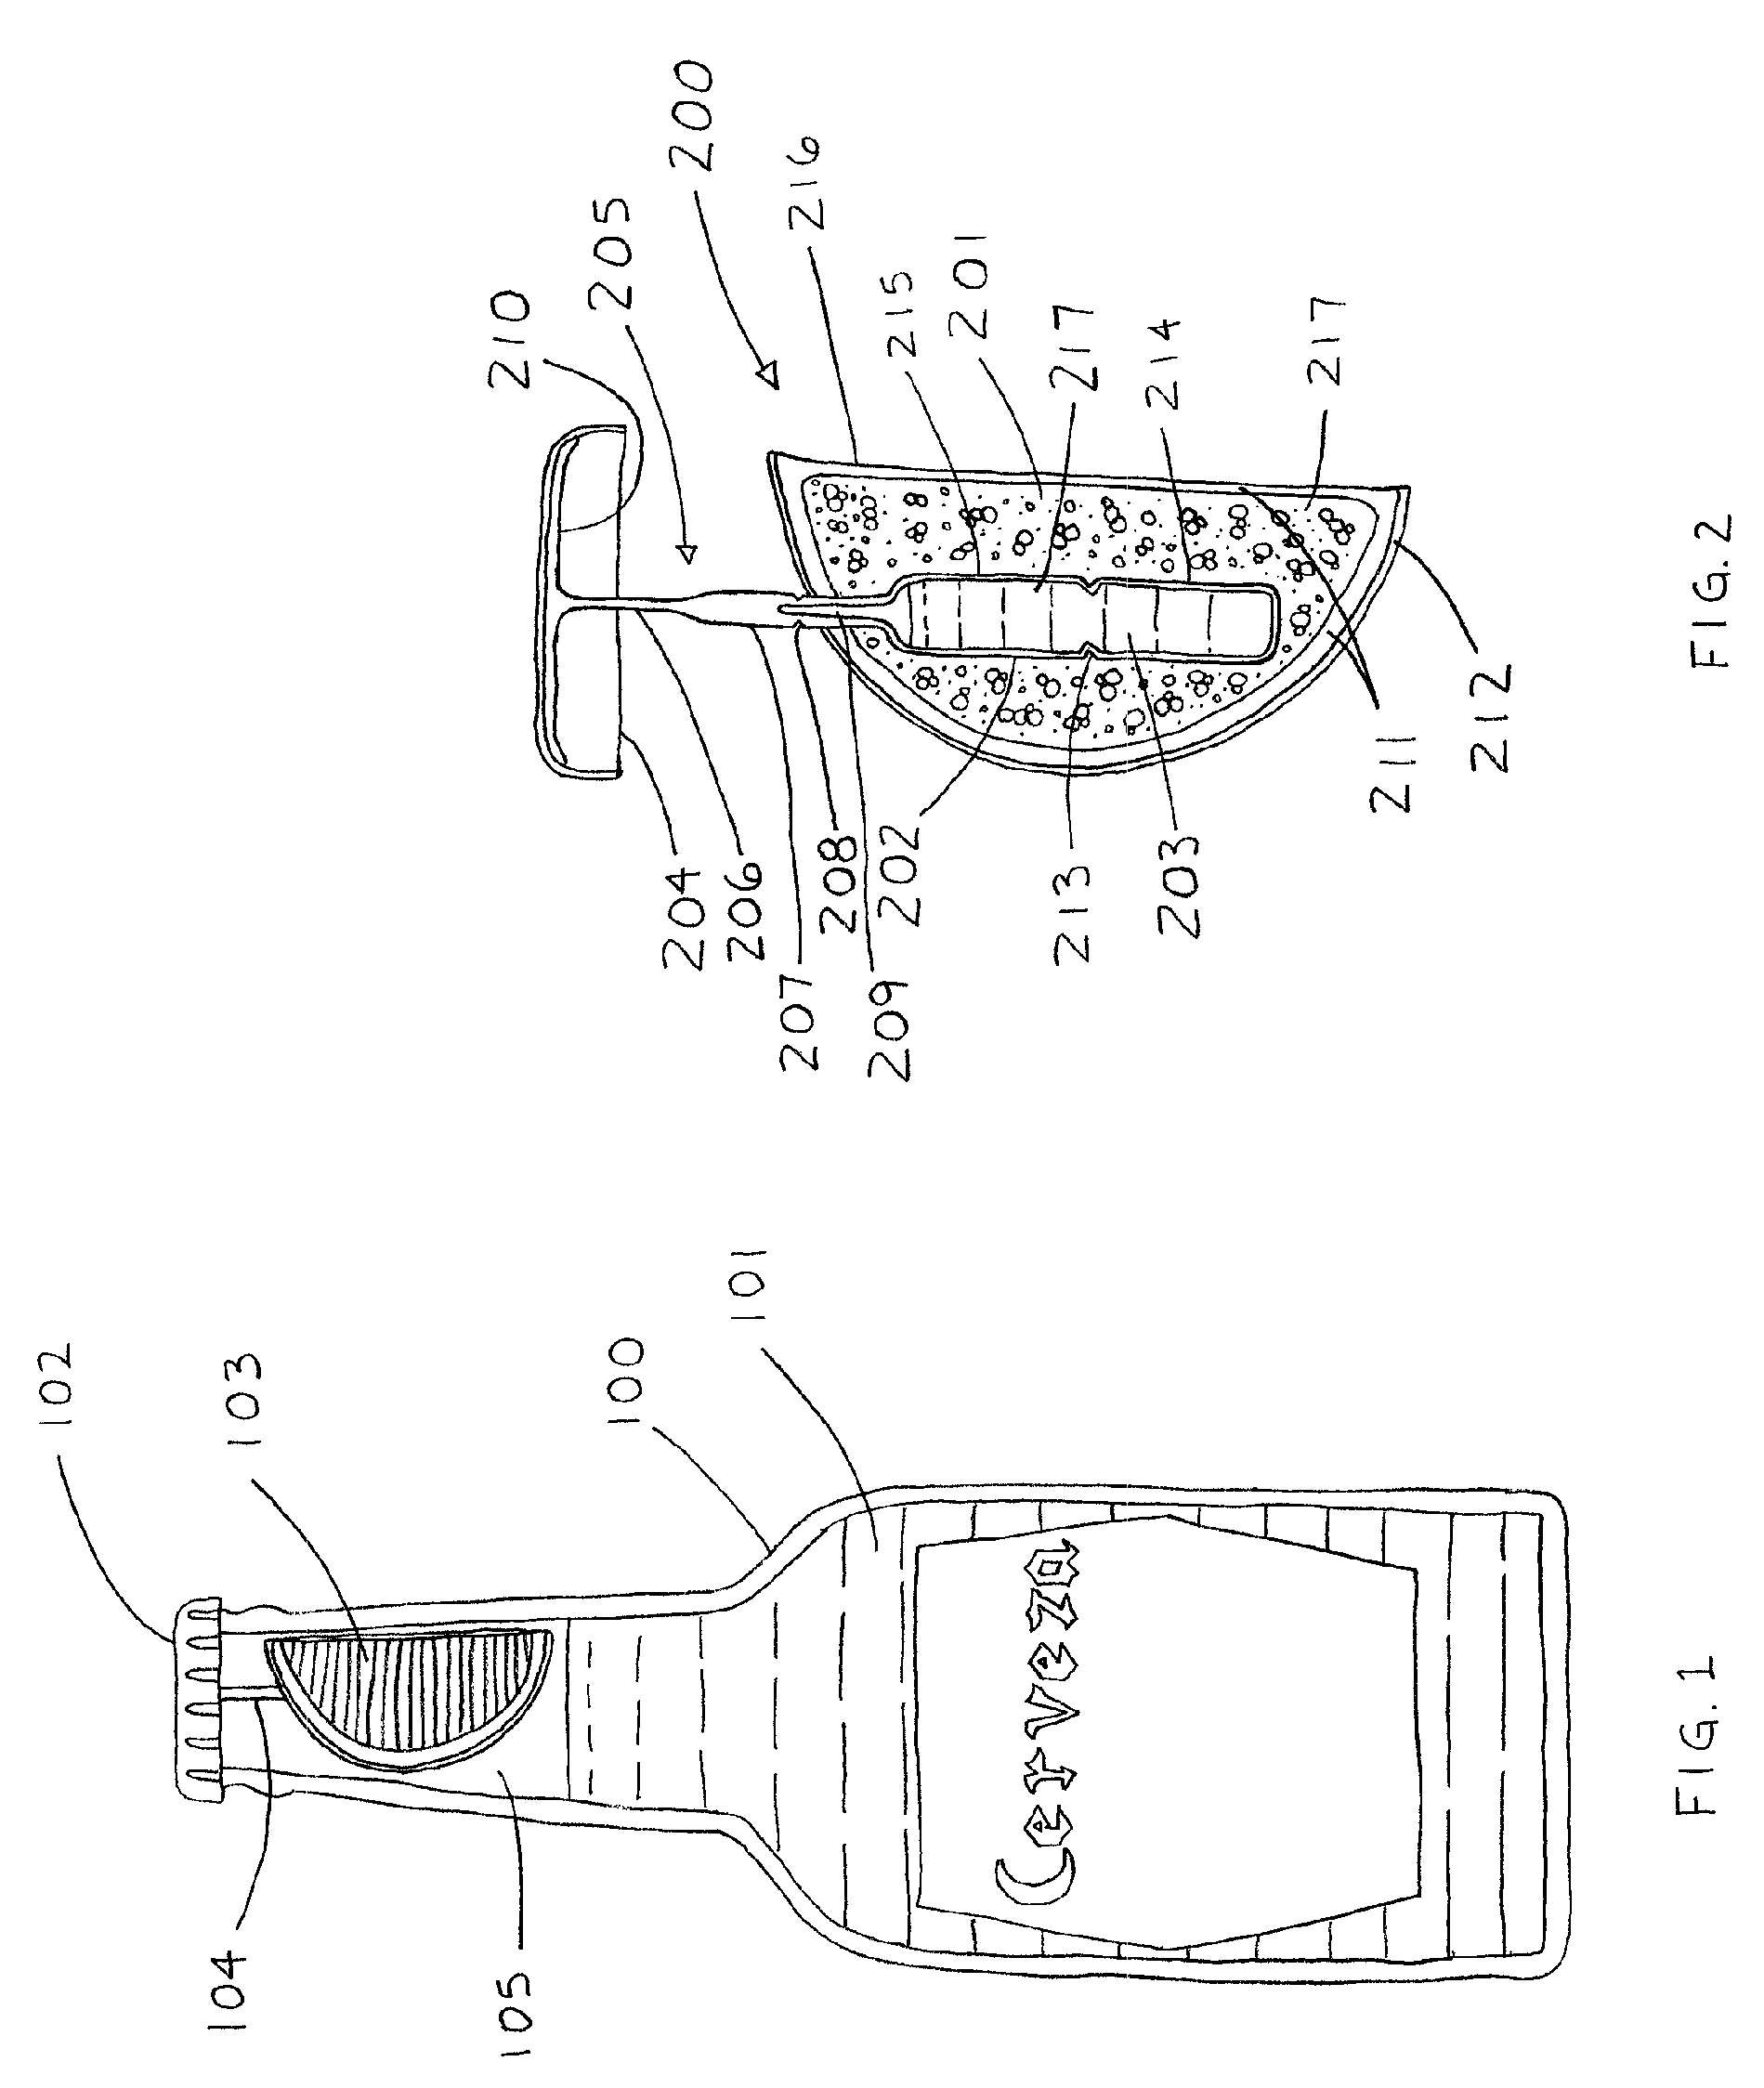 Fruit flavoring in the image of a fruit portion stored with a vessel for flavoring a fluid